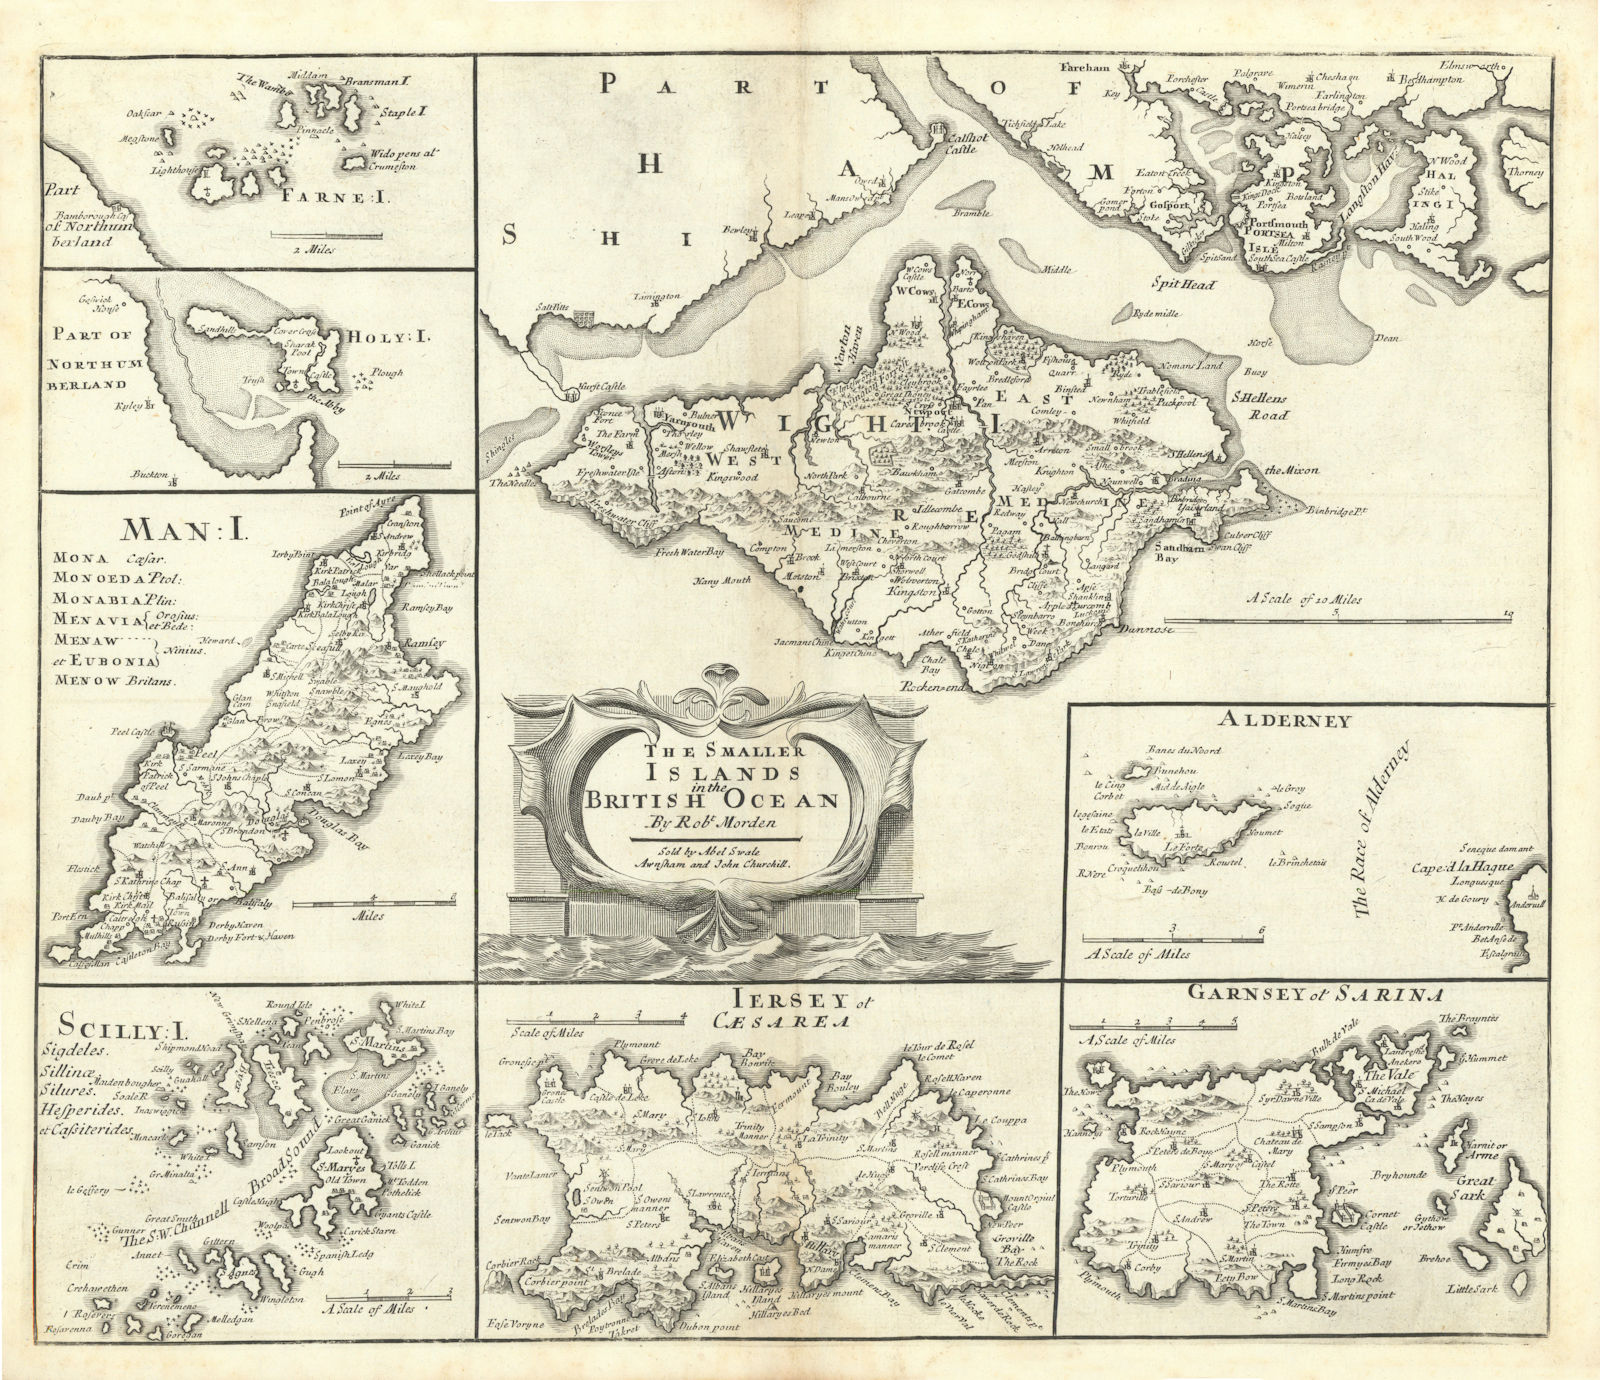 ENGLAND. Isles of Wight/Man Scilly Isles Farne/Channel Islands. MORDEN 1722 map